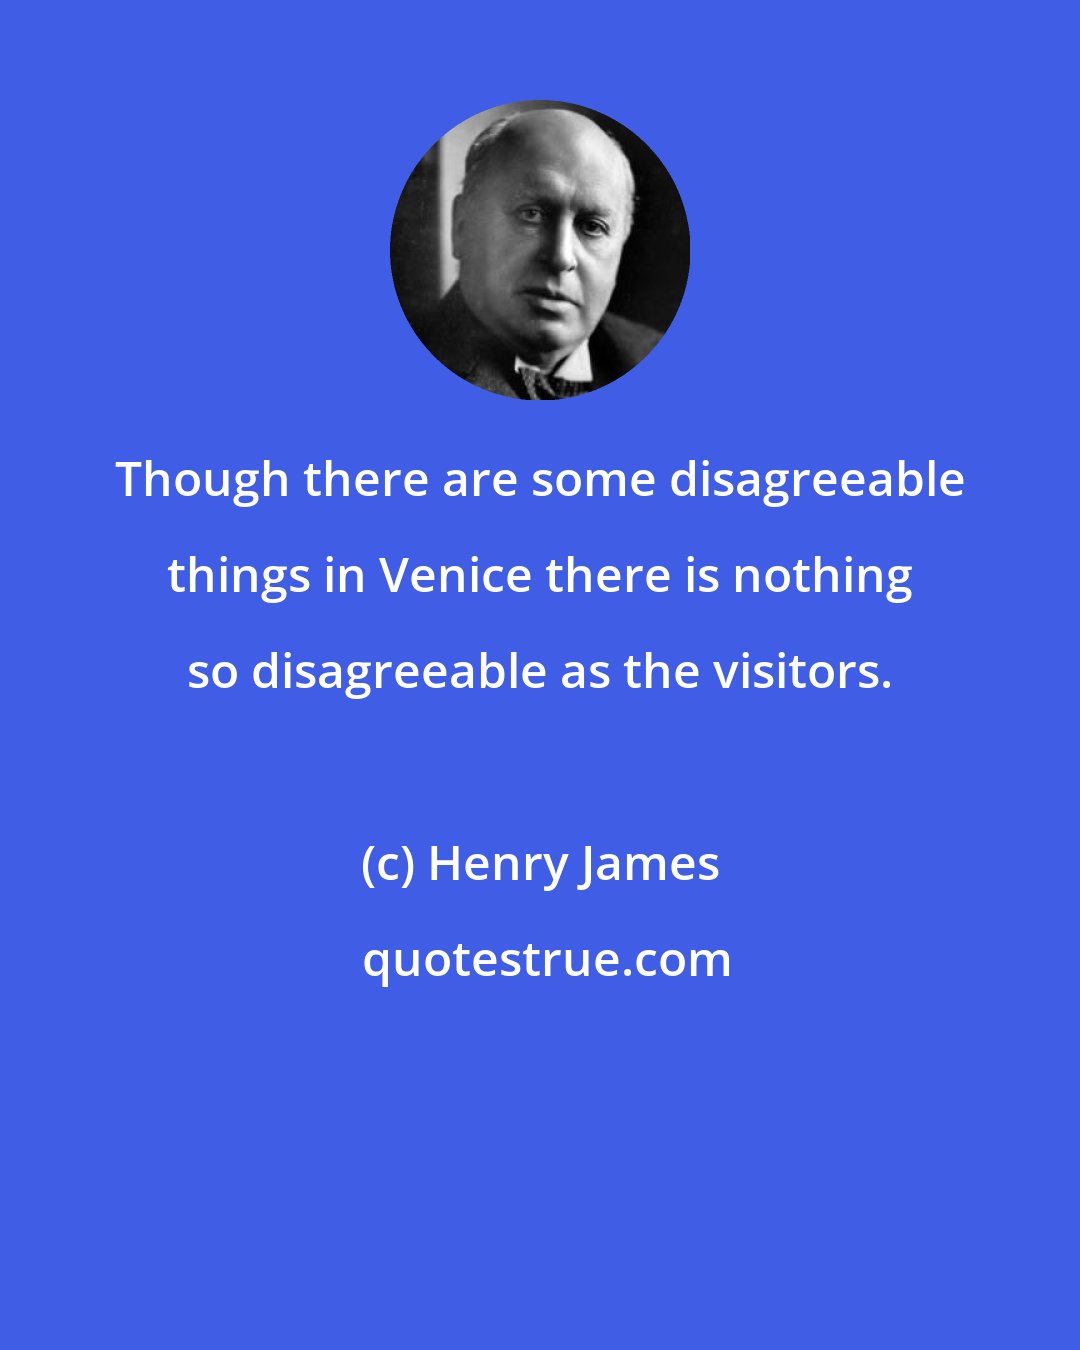 Henry James: Though there are some disagreeable things in Venice there is nothing so disagreeable as the visitors.